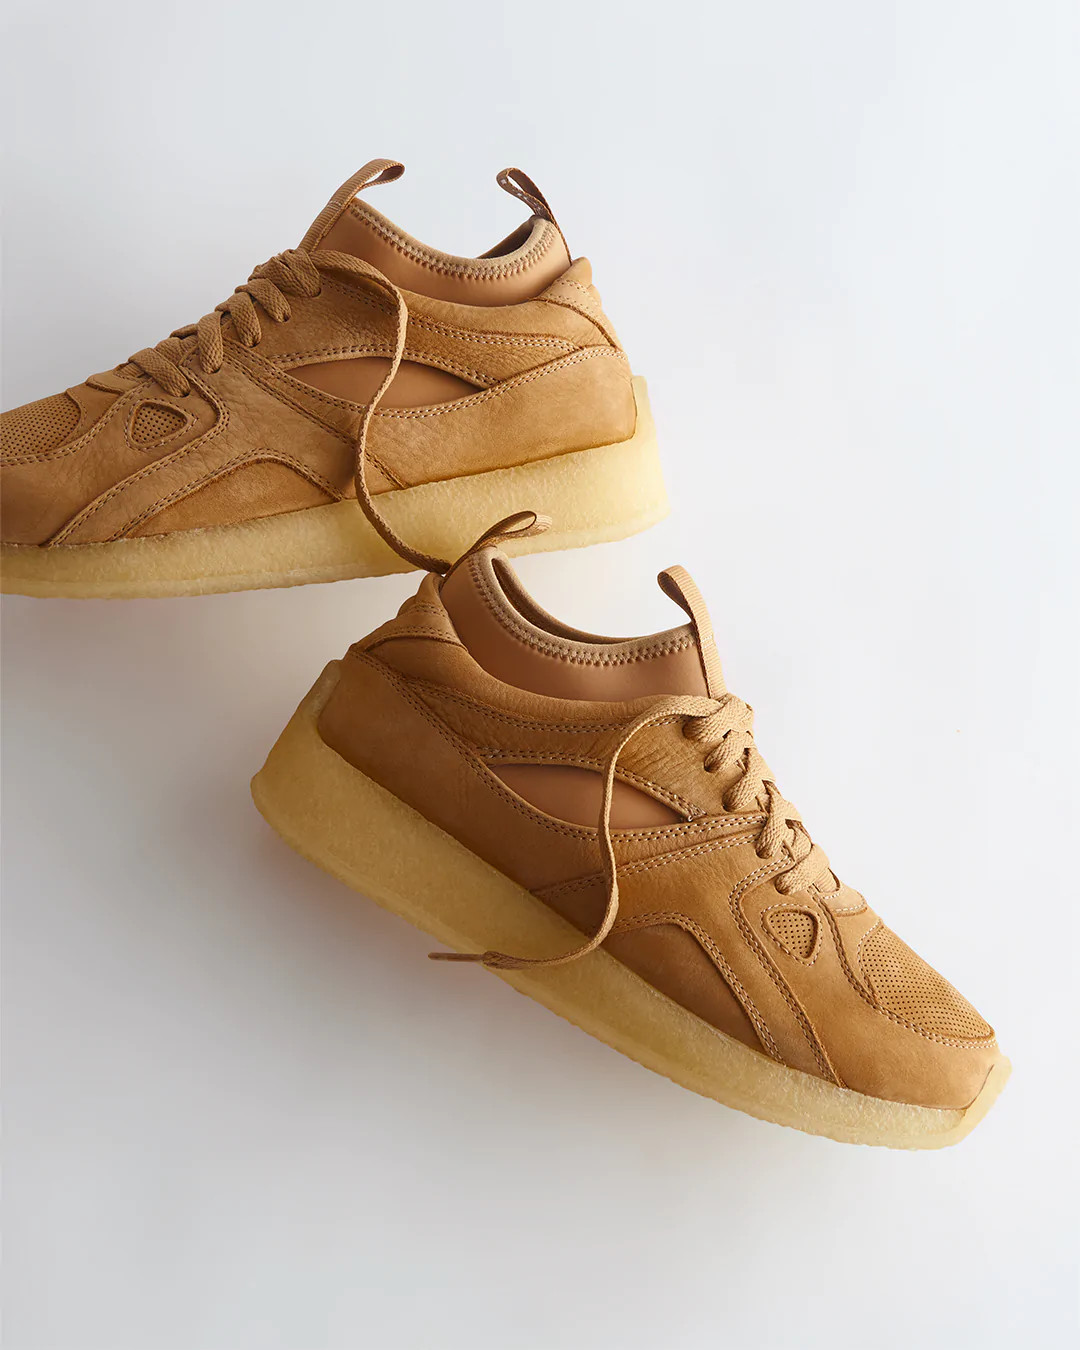 8th St by Ronnie Fieg for Clarks Originals Fall 2022 at Kith Tokyo ...